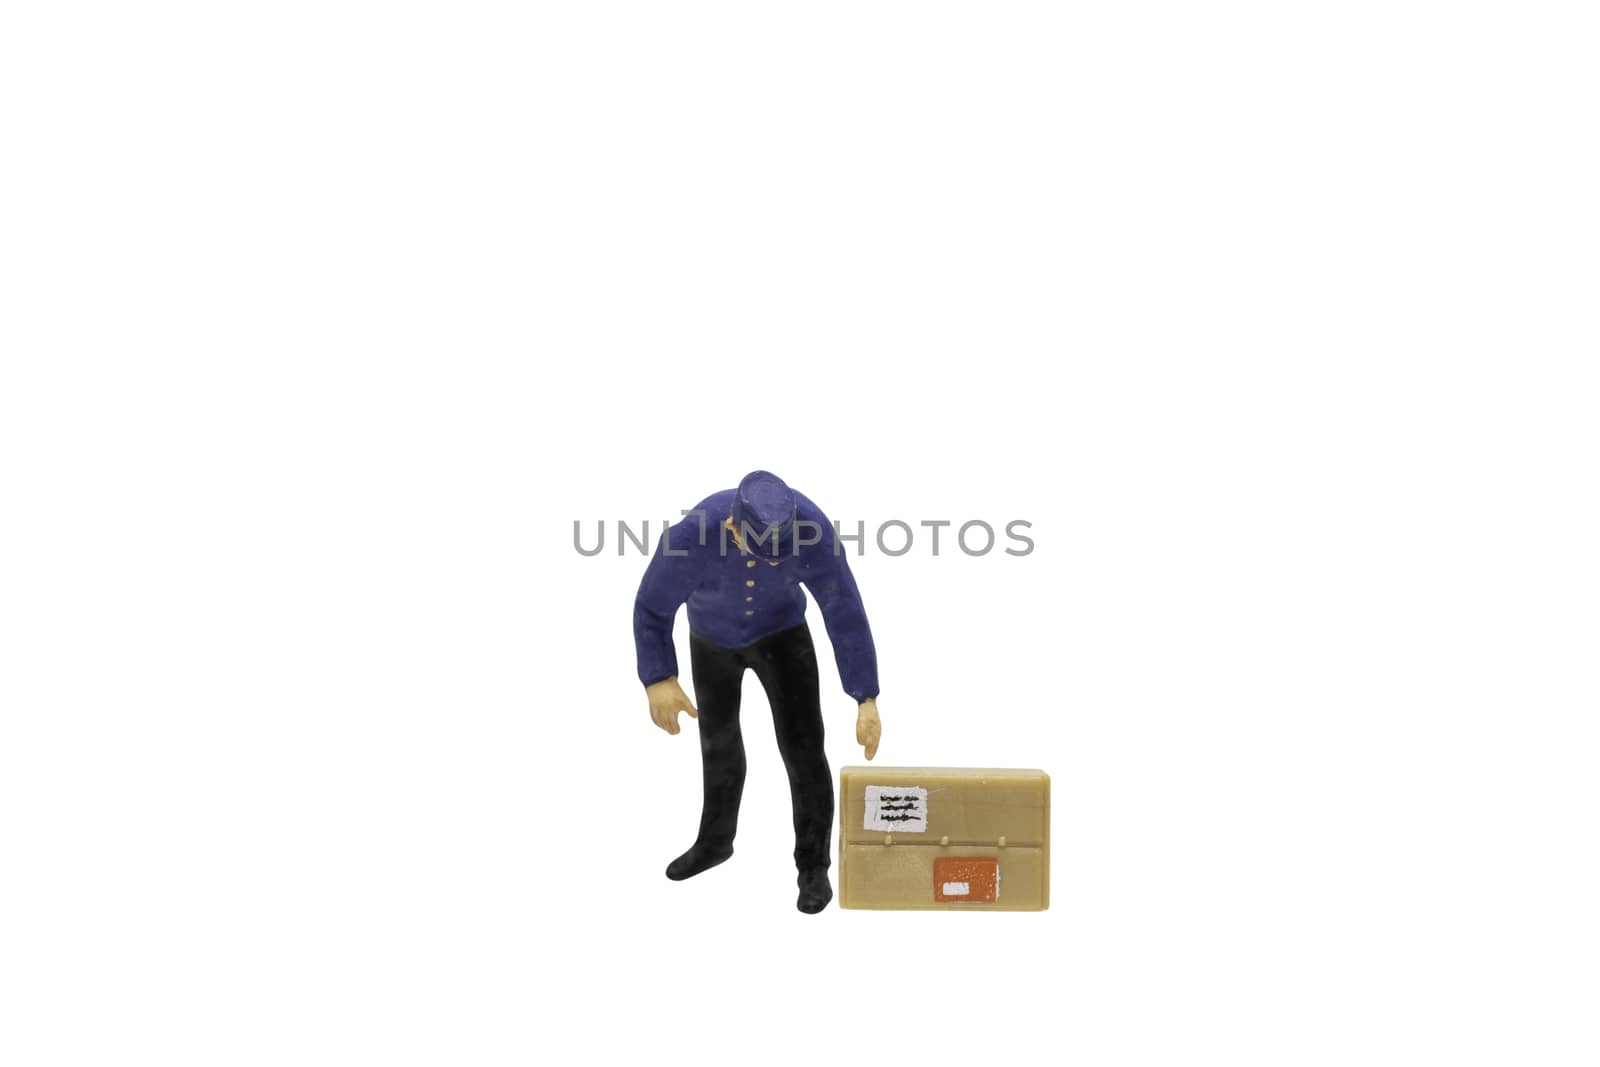 Miniature worker people isolated on white background with clipping path